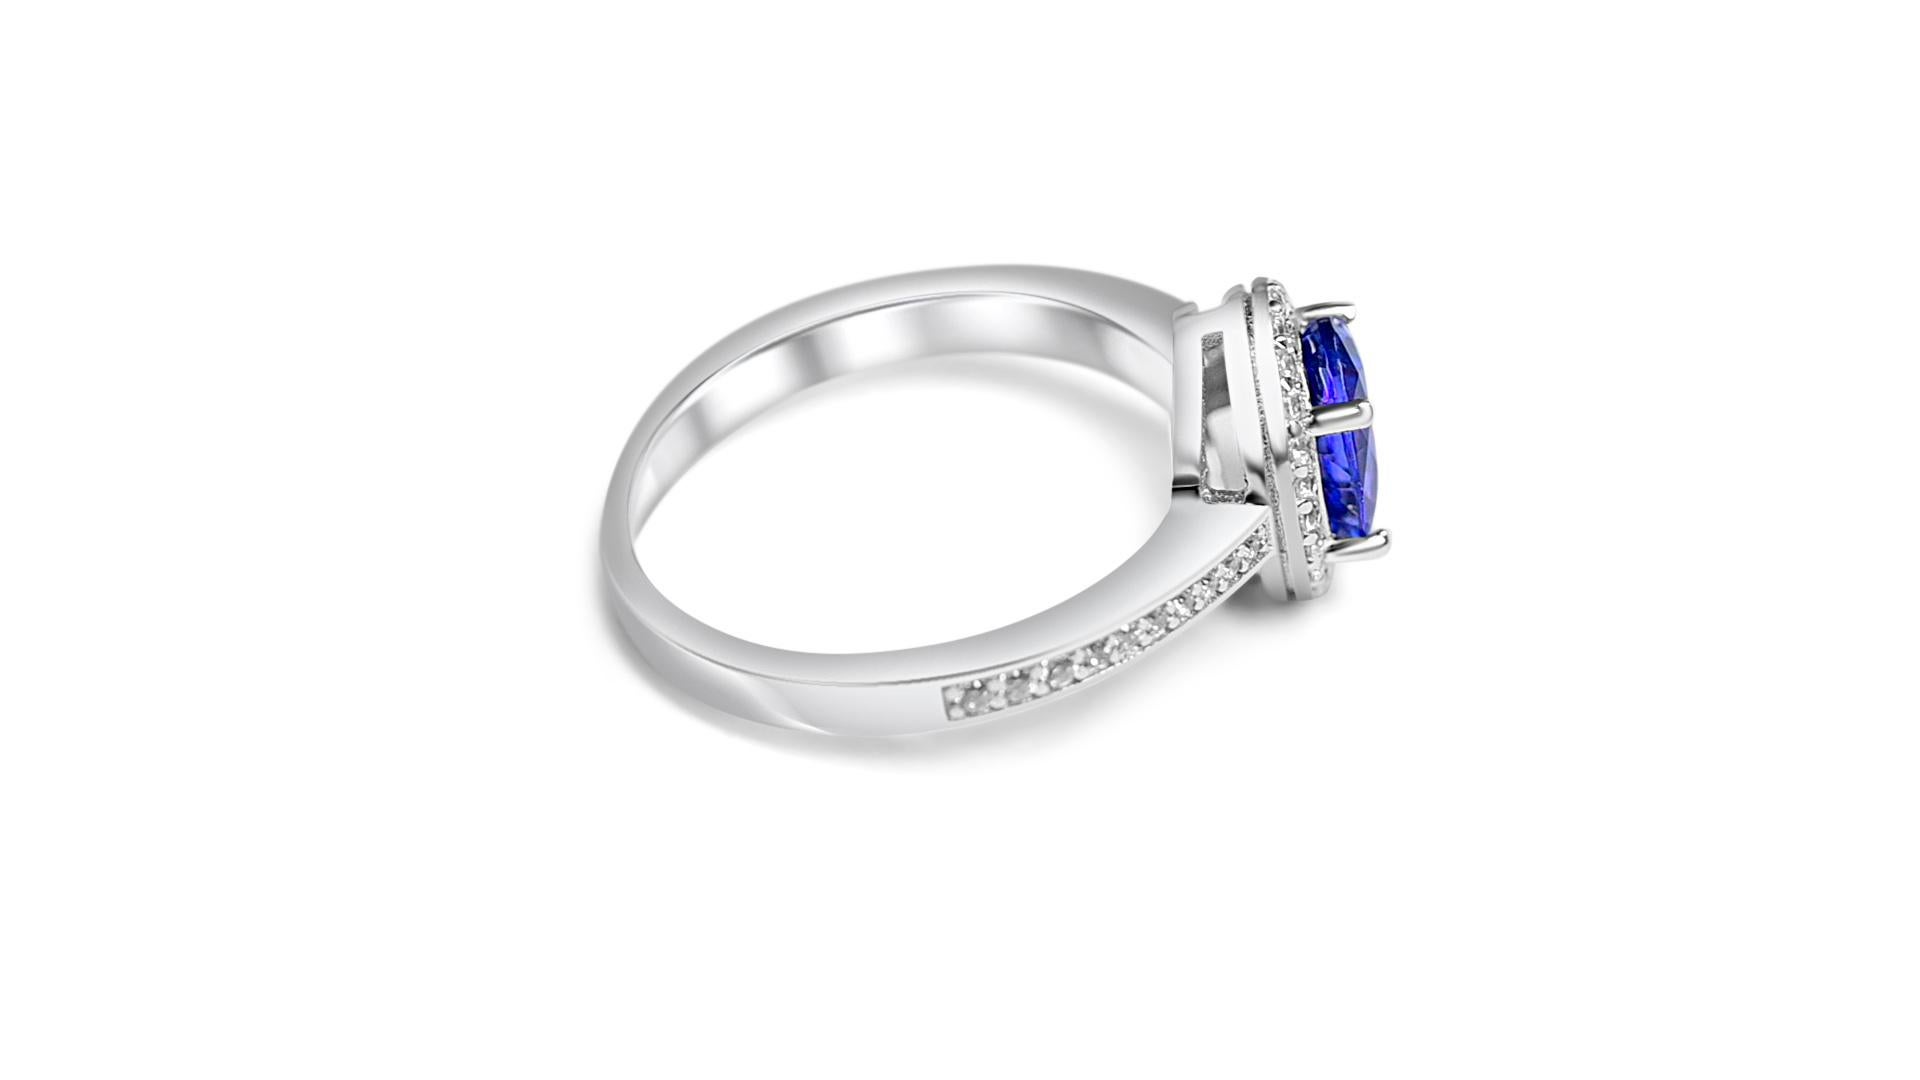 Welcome to Blue Star Gems NY LLC!  Discover popular engagement ring & wedding ring designs from classic to vintage inspired. We offer Joyful jewelry for everyday wear. Just for you. We go above and beyond the current industry standards to offer